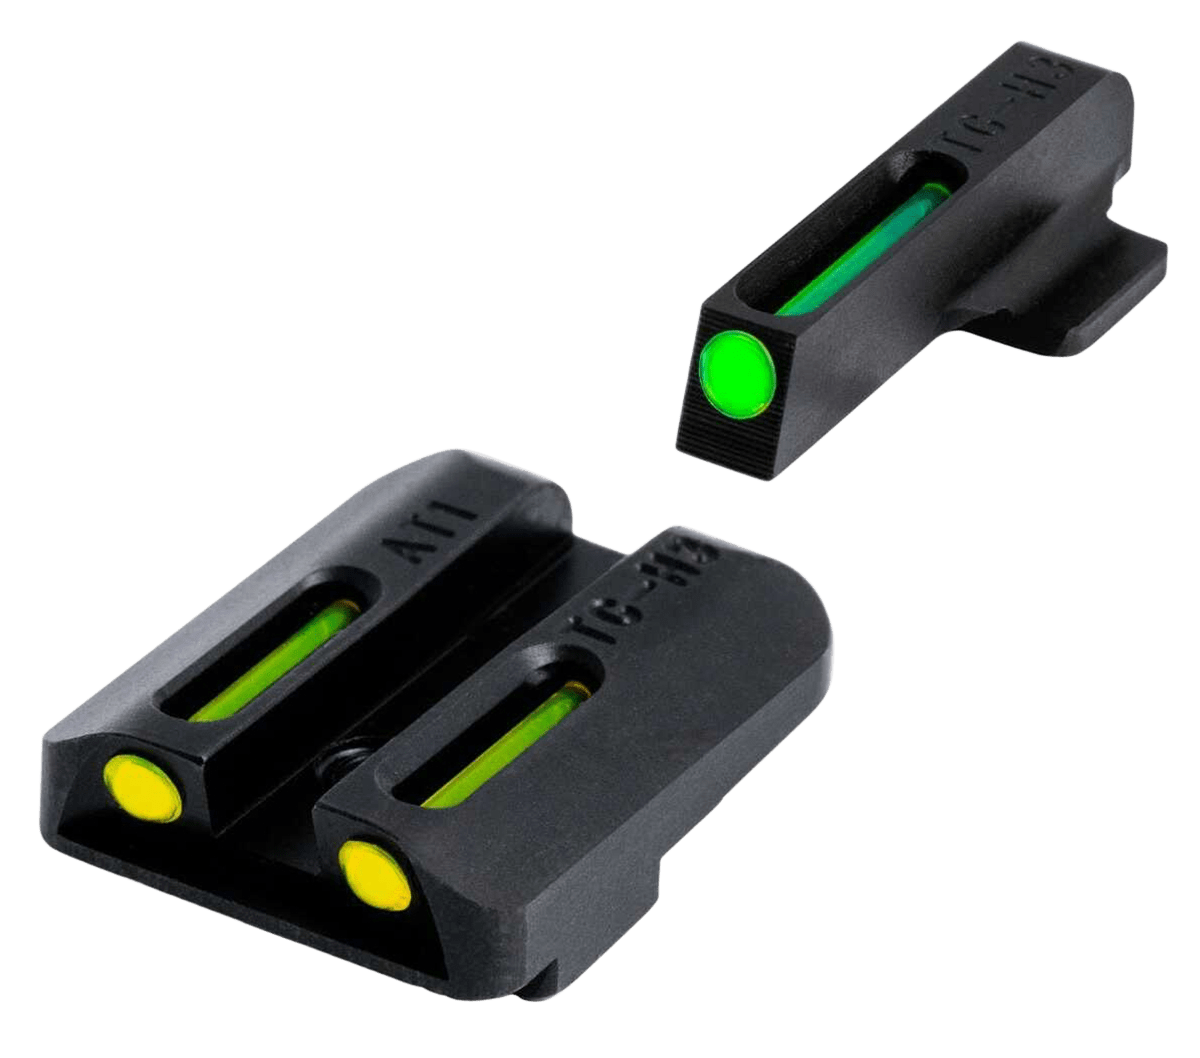 Truglo Truglo Brite-site Tfo For G42 G/y Sights/Lasers/Lights